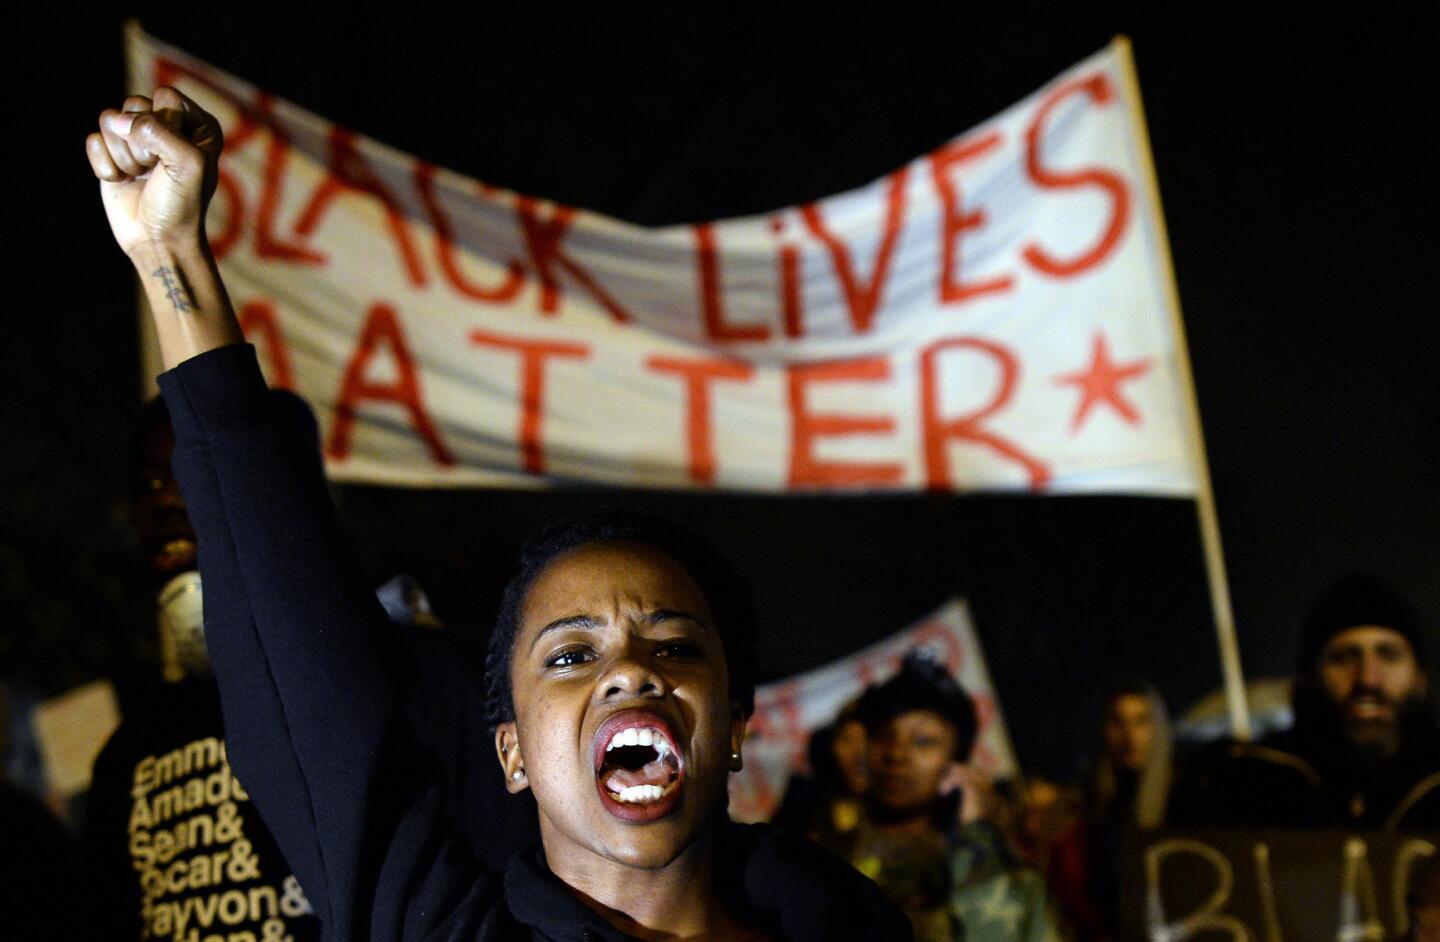 Demonstrators shout slogans during a march in St. Louis, Missouri, on Nov. 23 to protest the death of 18-year-old Michael Brown.